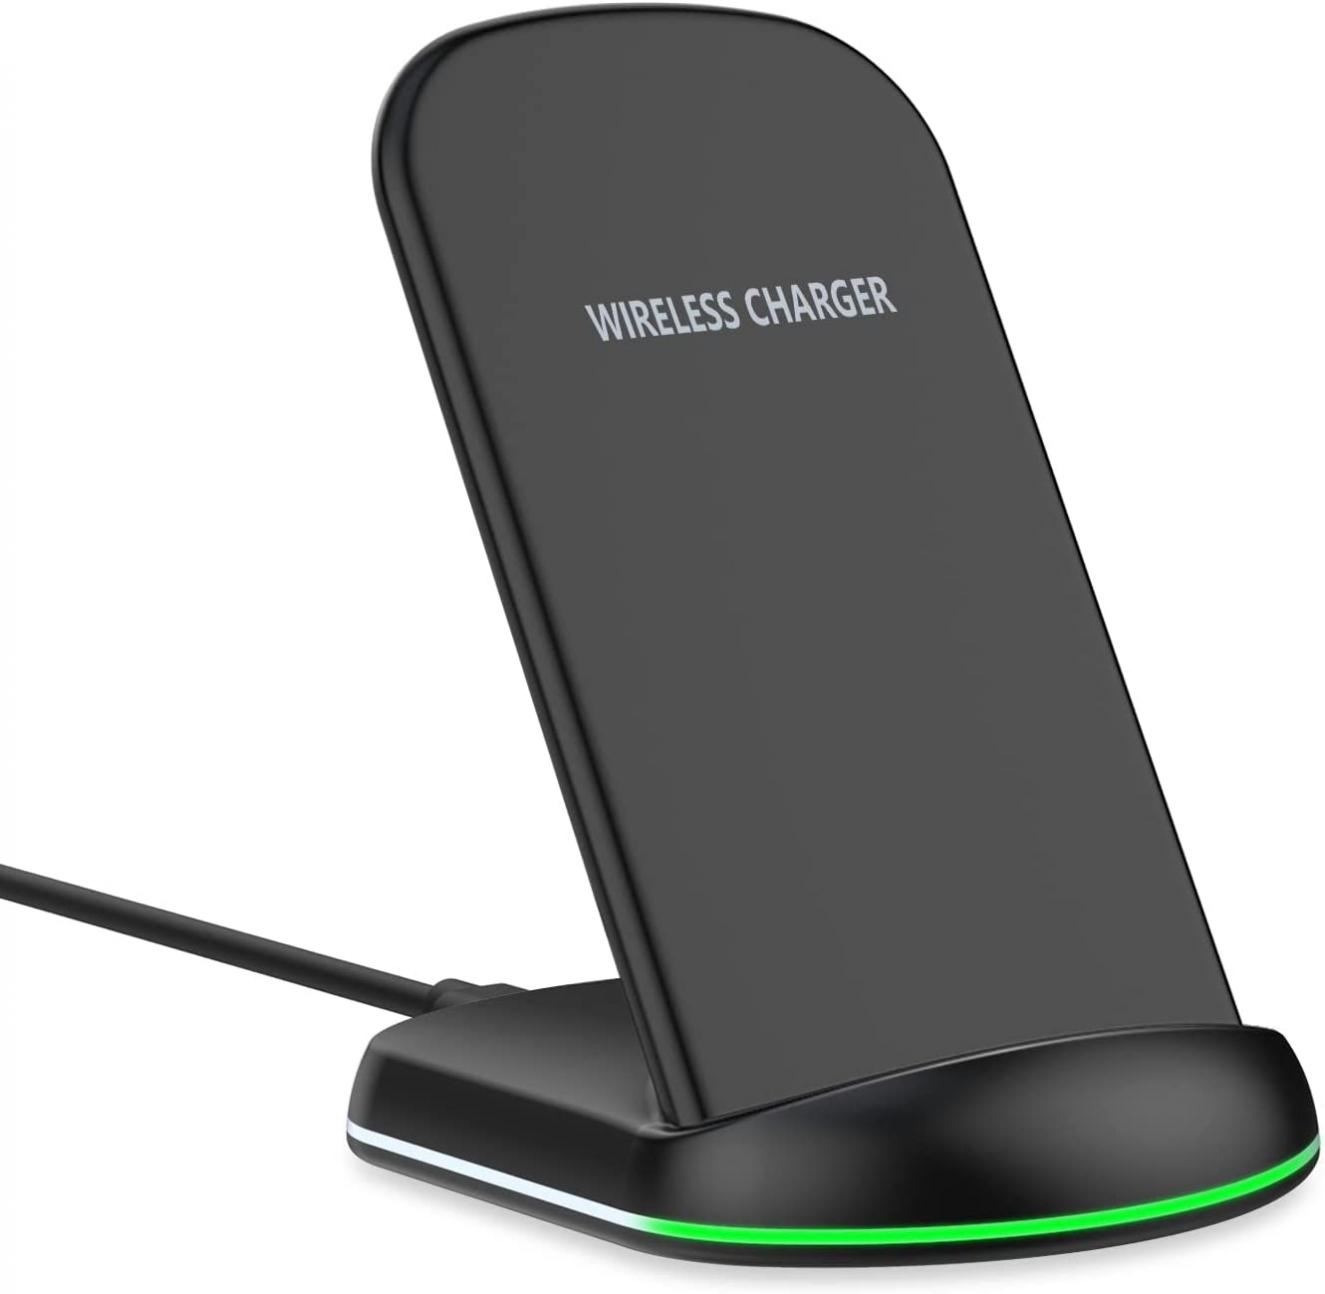 Yootech Wireless Charger,10W Max Wireless Charging Stand, Compatible with iPhone 14/14 Plus/14 Pro/14 Pro Max/13/13 Mini/13 Pro Max/SE 2022/12/11/X/8, Galaxy S22/S22 Ultra/S21/S20/S10(No AC Adapter)